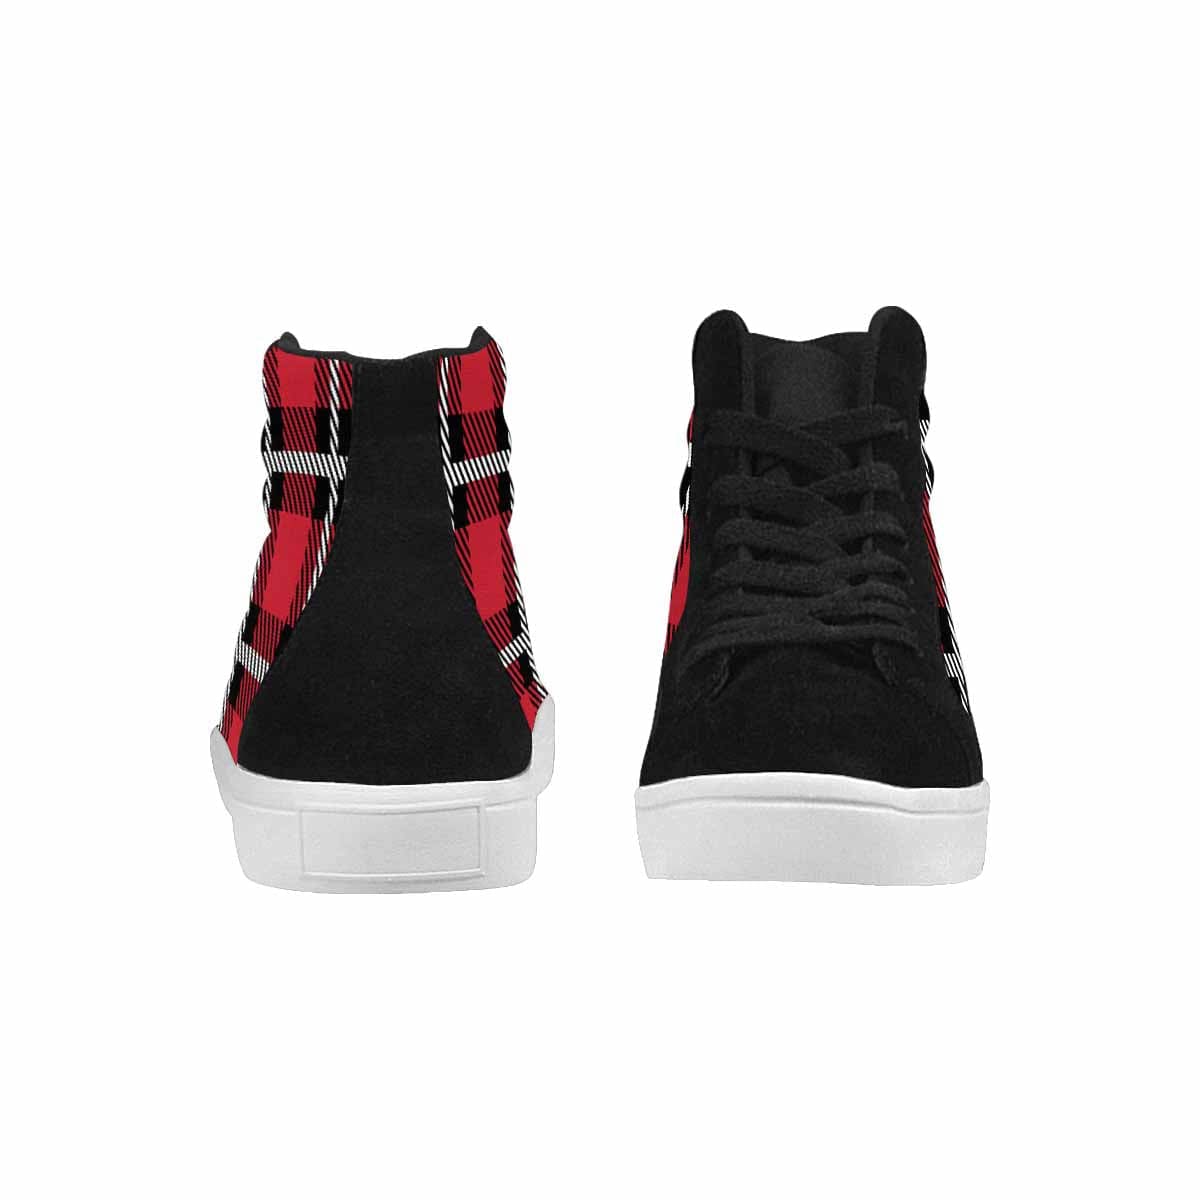 Uniquely You Sneakers for Men, Red and Black Buffalo Plaid - High Top Sports Shoes - Scarvesnthangs